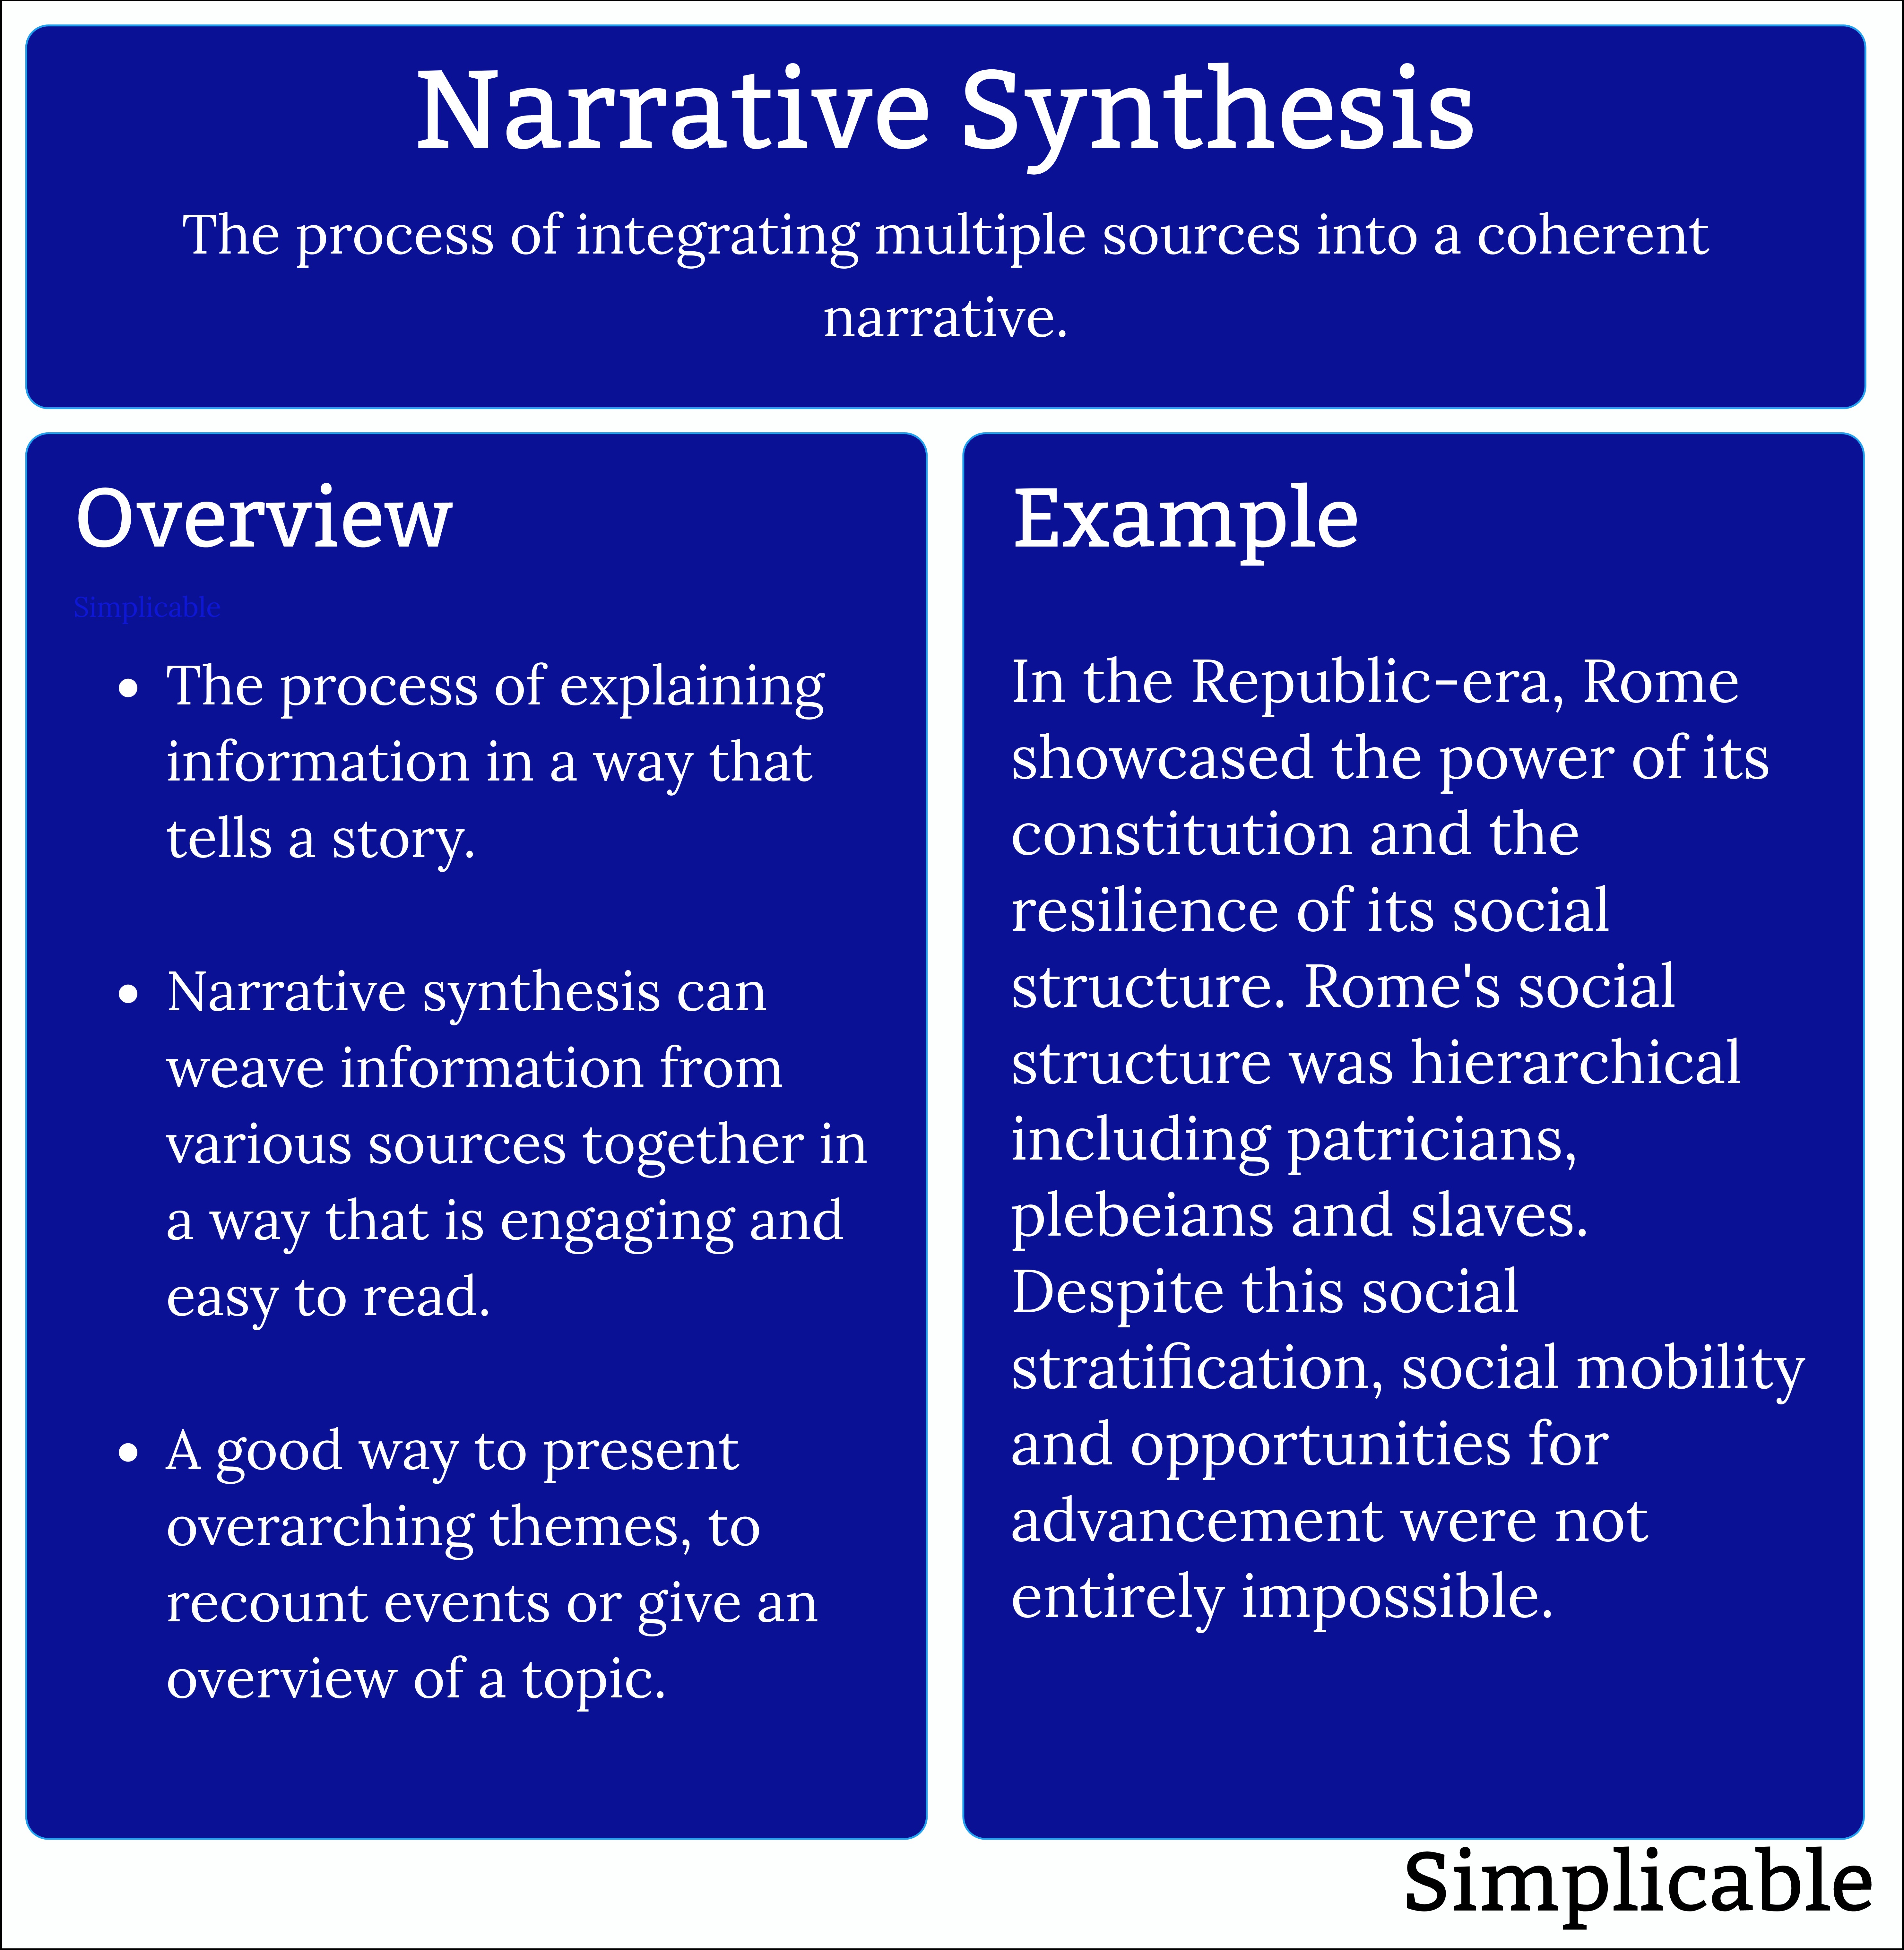 narrative synthesis summary and example